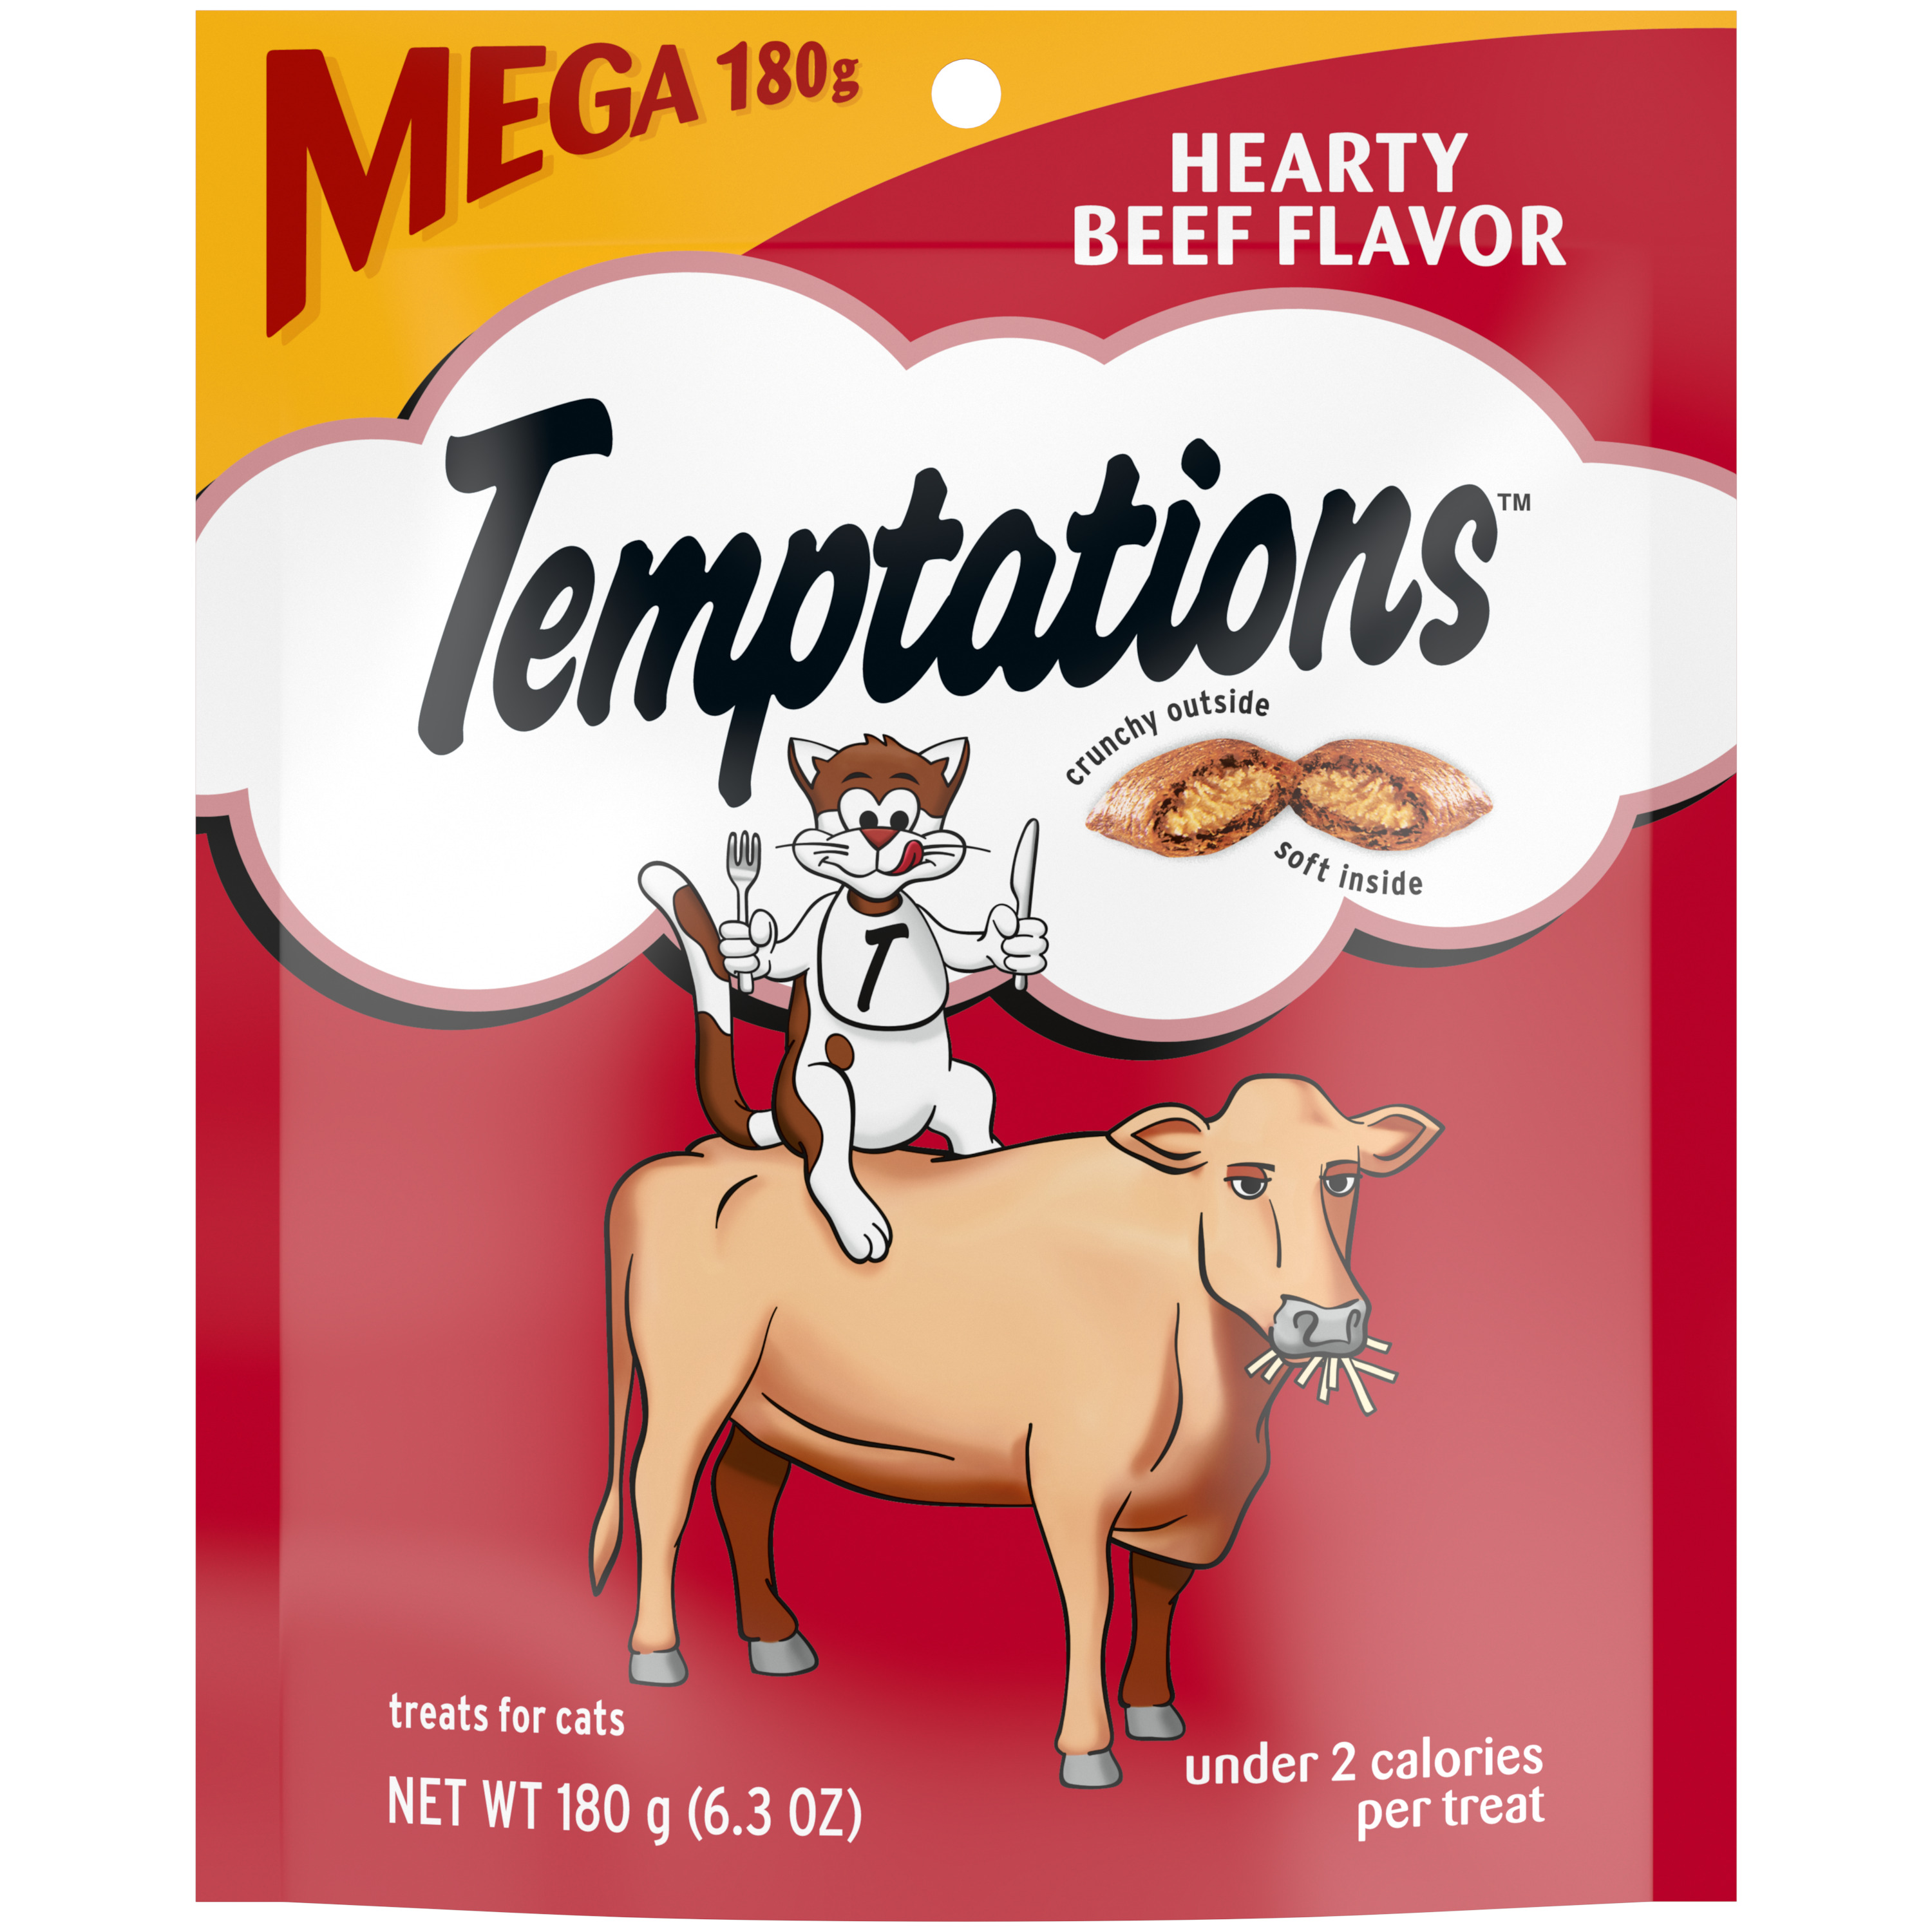 6.35 oz. Whiskas Temptations Hearty Beef Flavor - Health/First Aid